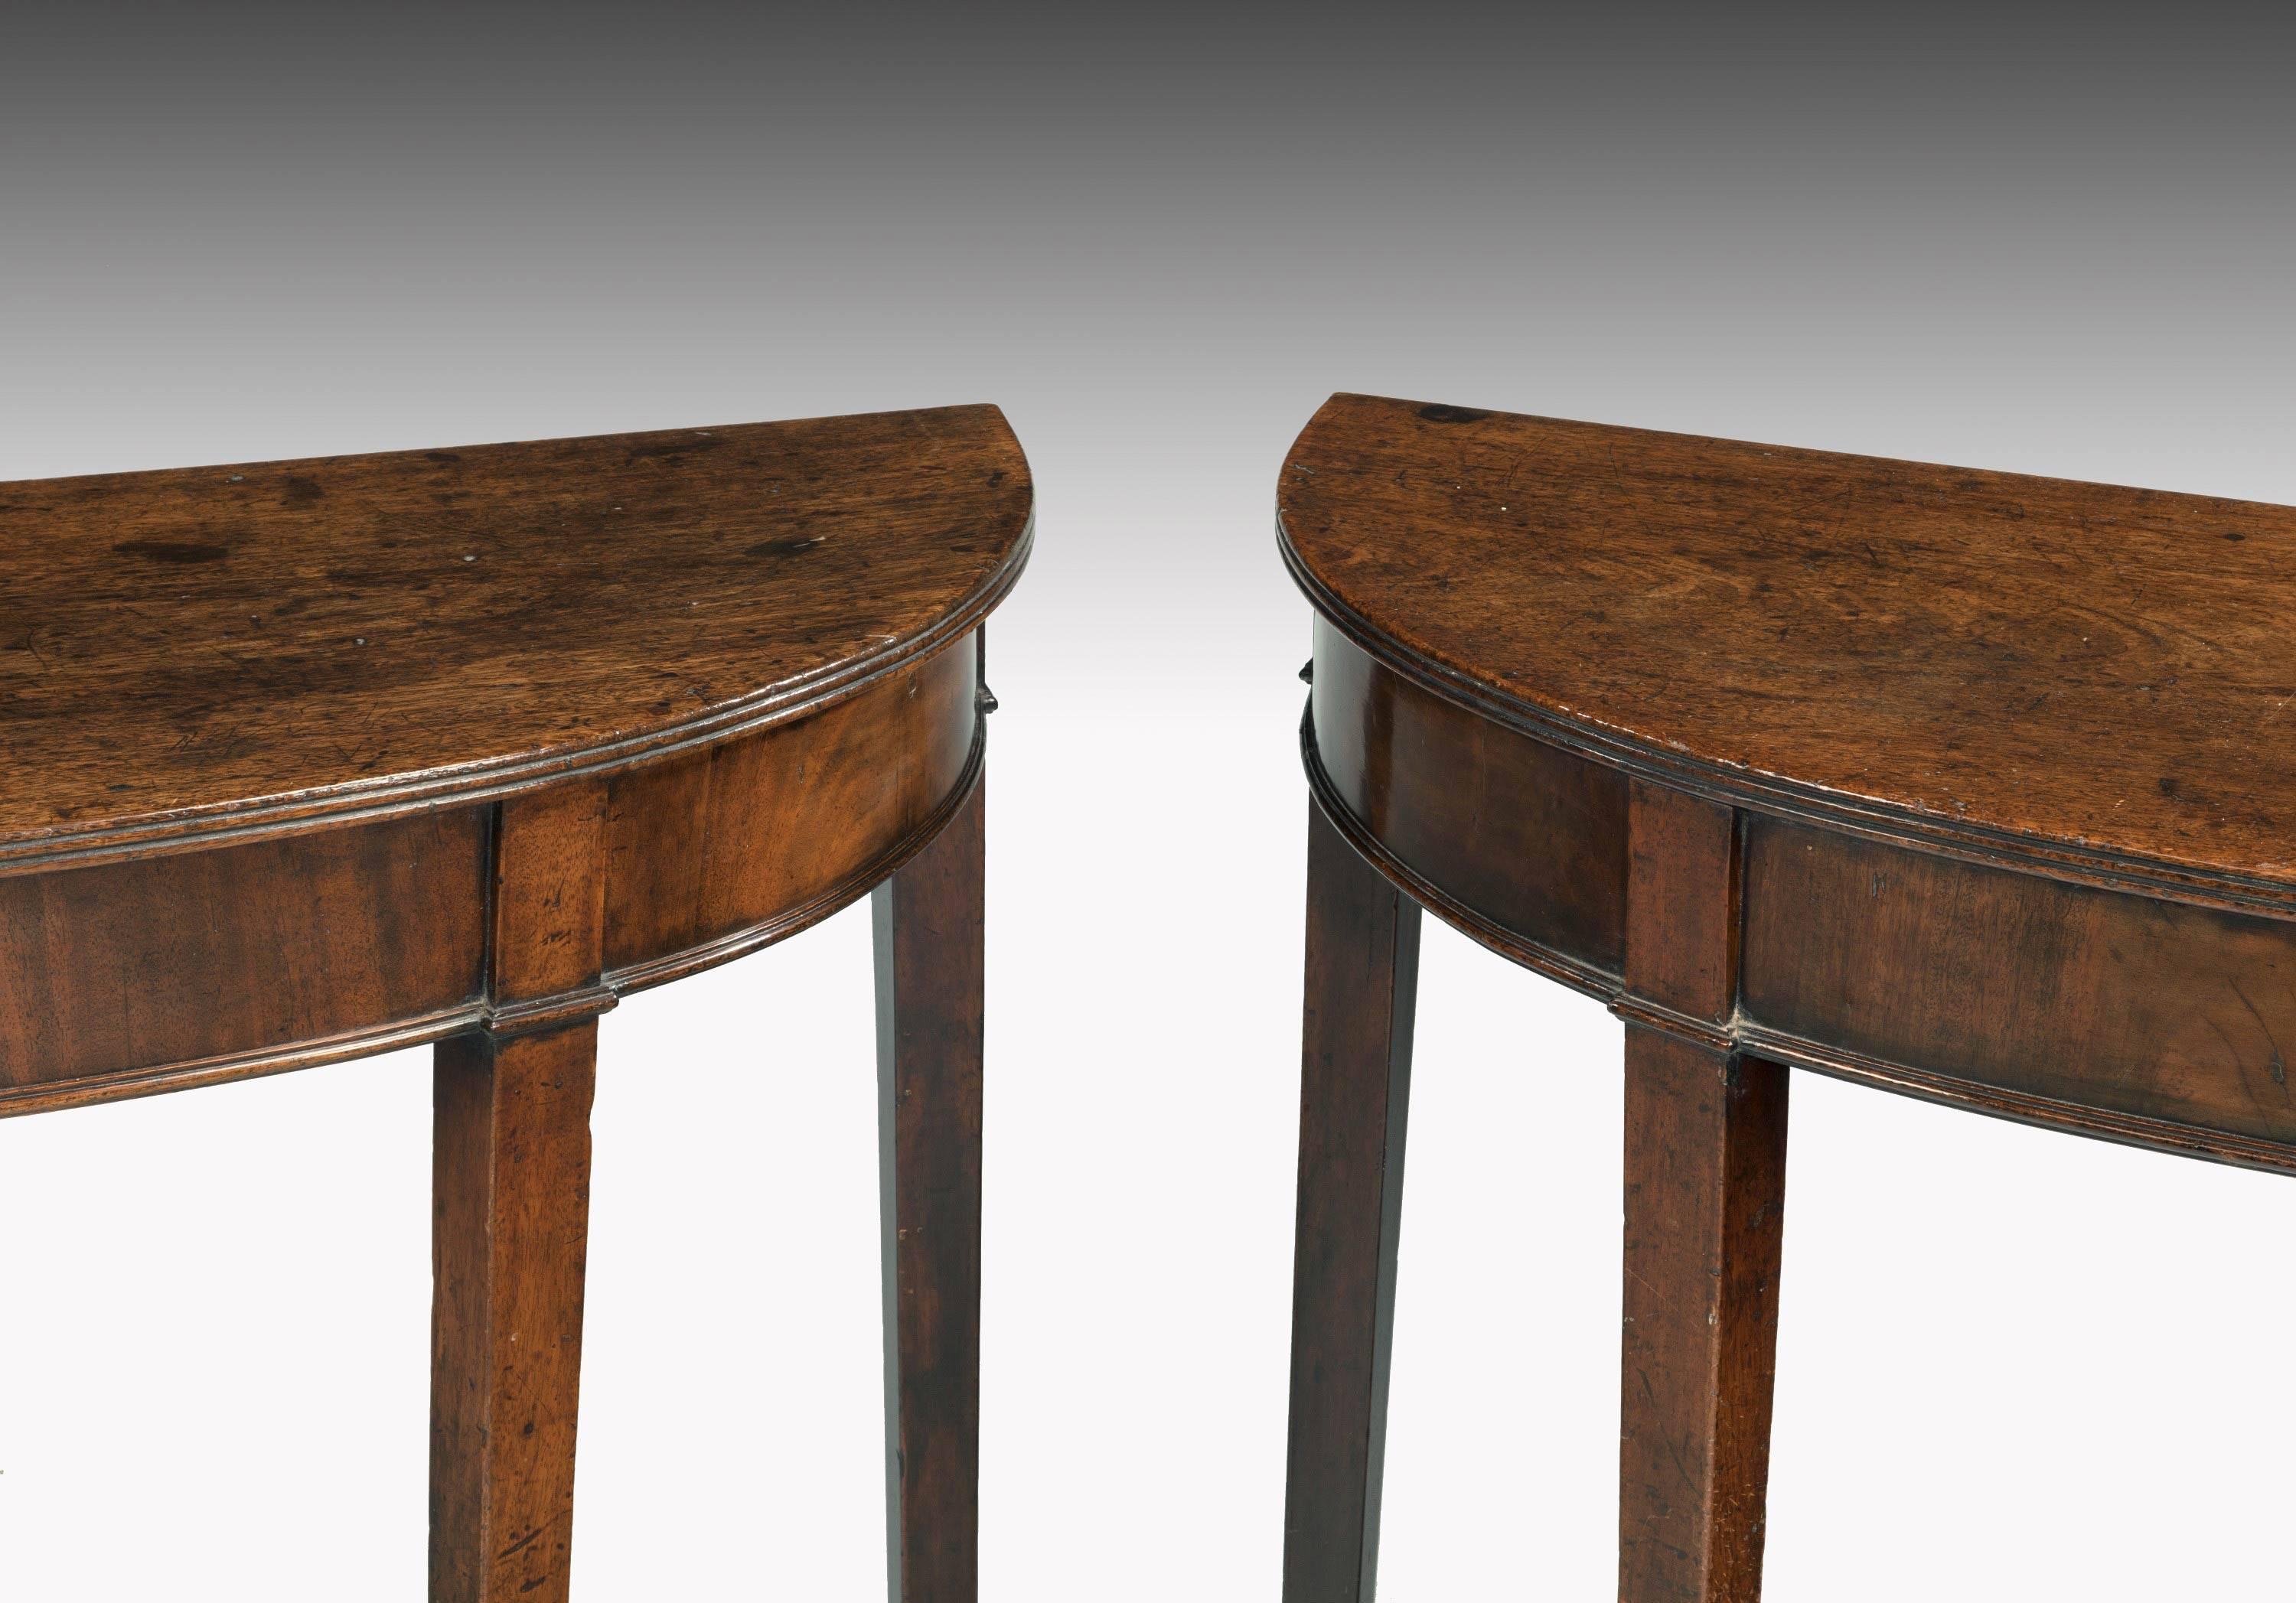 English Pair of George III Period Bow Front Pier Tables